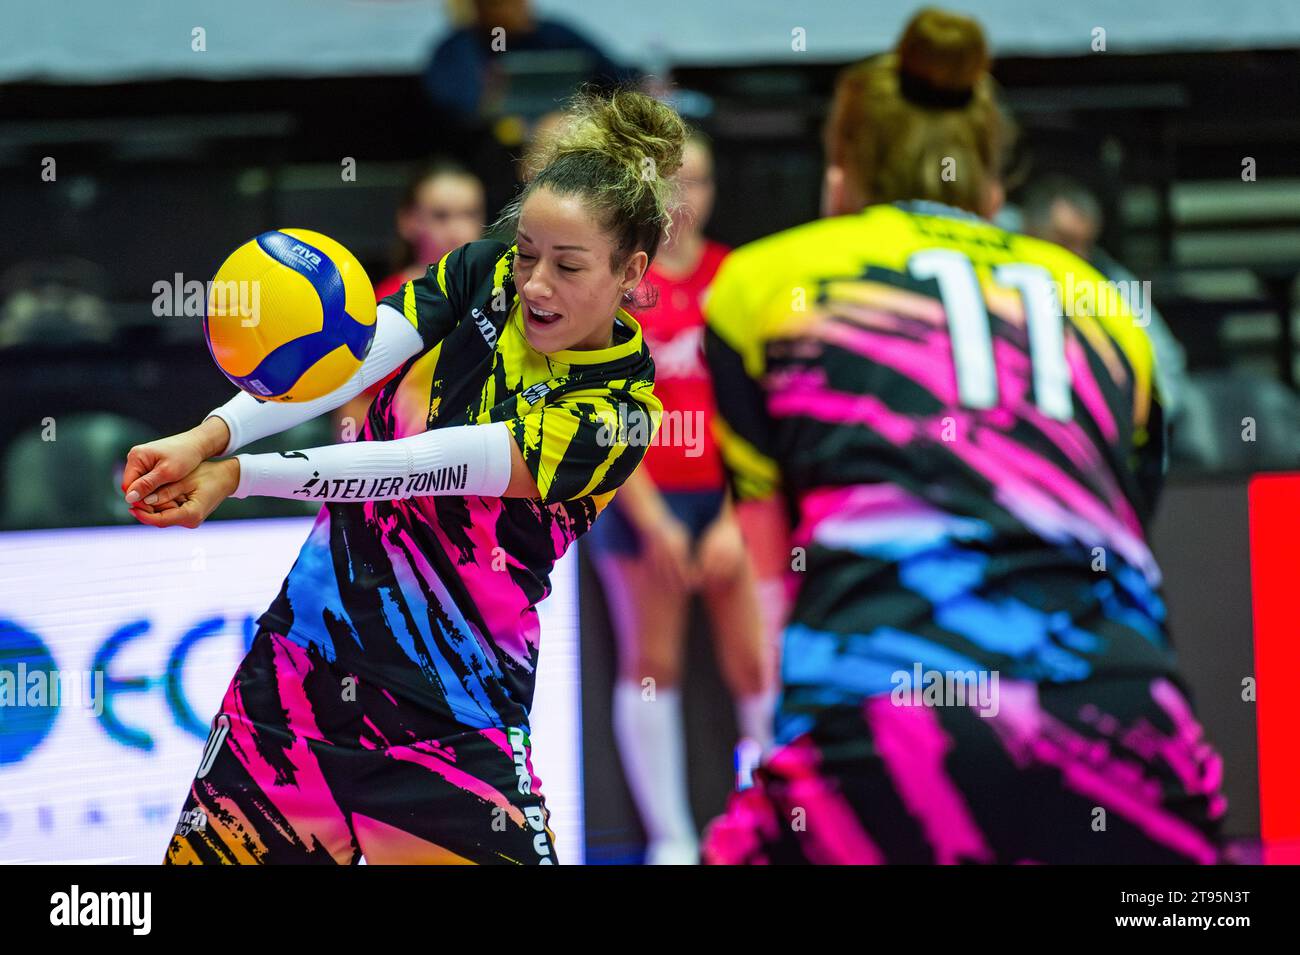 Treviso, Italy. 22nd Nov, 2023. Monica De Gennaro (L) and Isabelle Haak (R) of Prosecco Doc Imoco Conegliano seen warming up before the LVF Serie A1 2023/24 volleyball match between Prosecco Doc Imoco Conegliano and Roma Volley Club at Palaverde stadium. Final score; Prosecco Doc Imoco Conegliano 3:0 Roma Volley Club. Credit: SOPA Images Limited/Alamy Live News Stock Photo